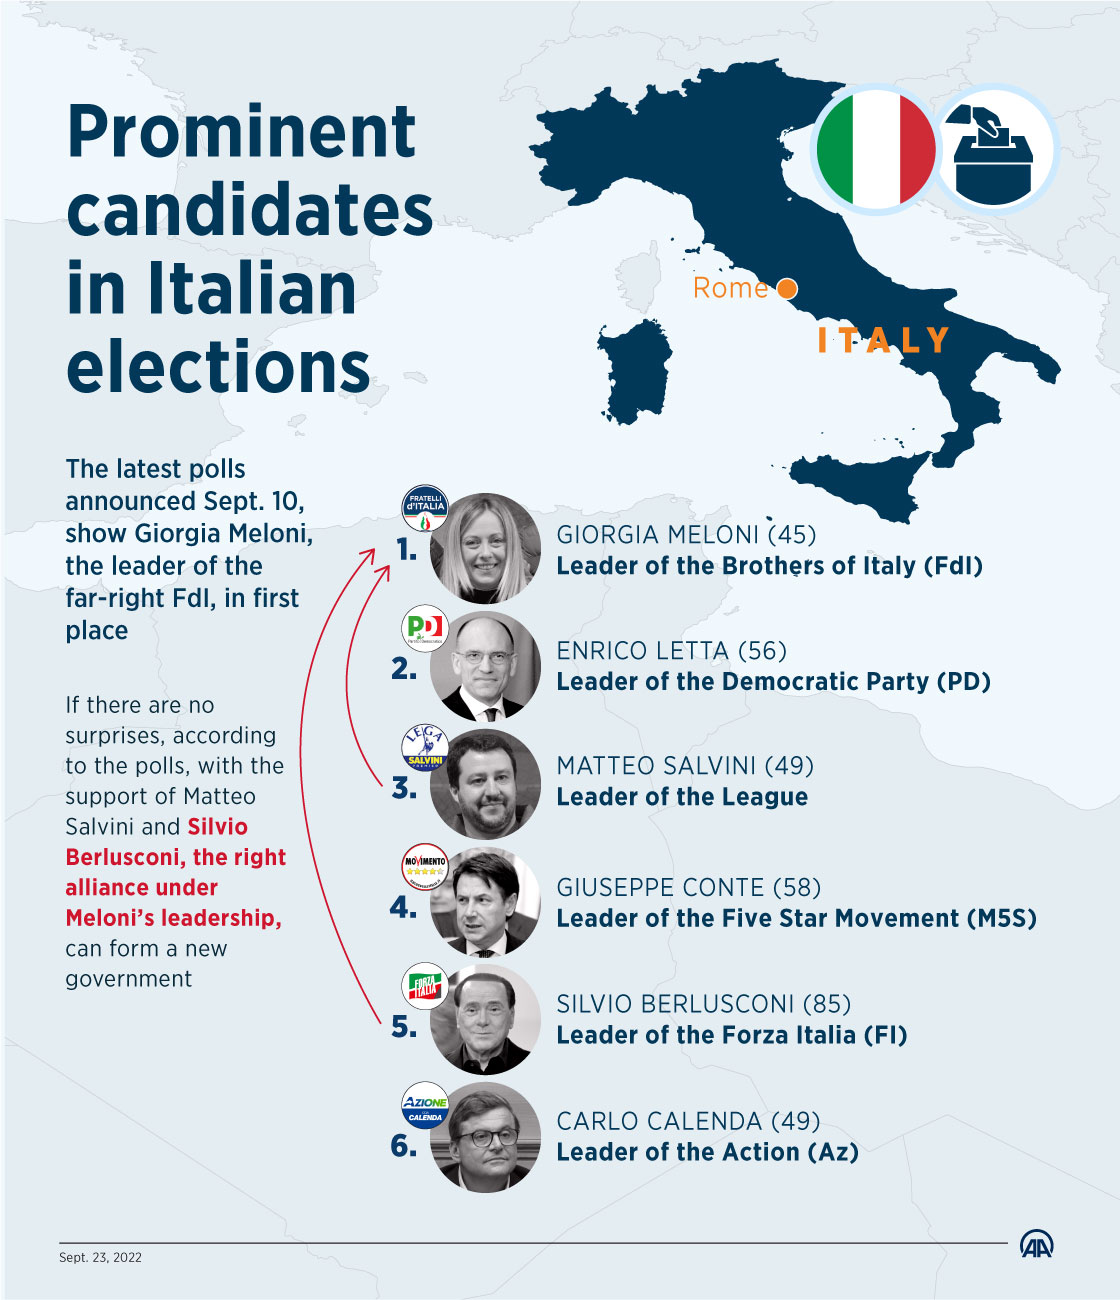 Prominent candidates in Italian elections